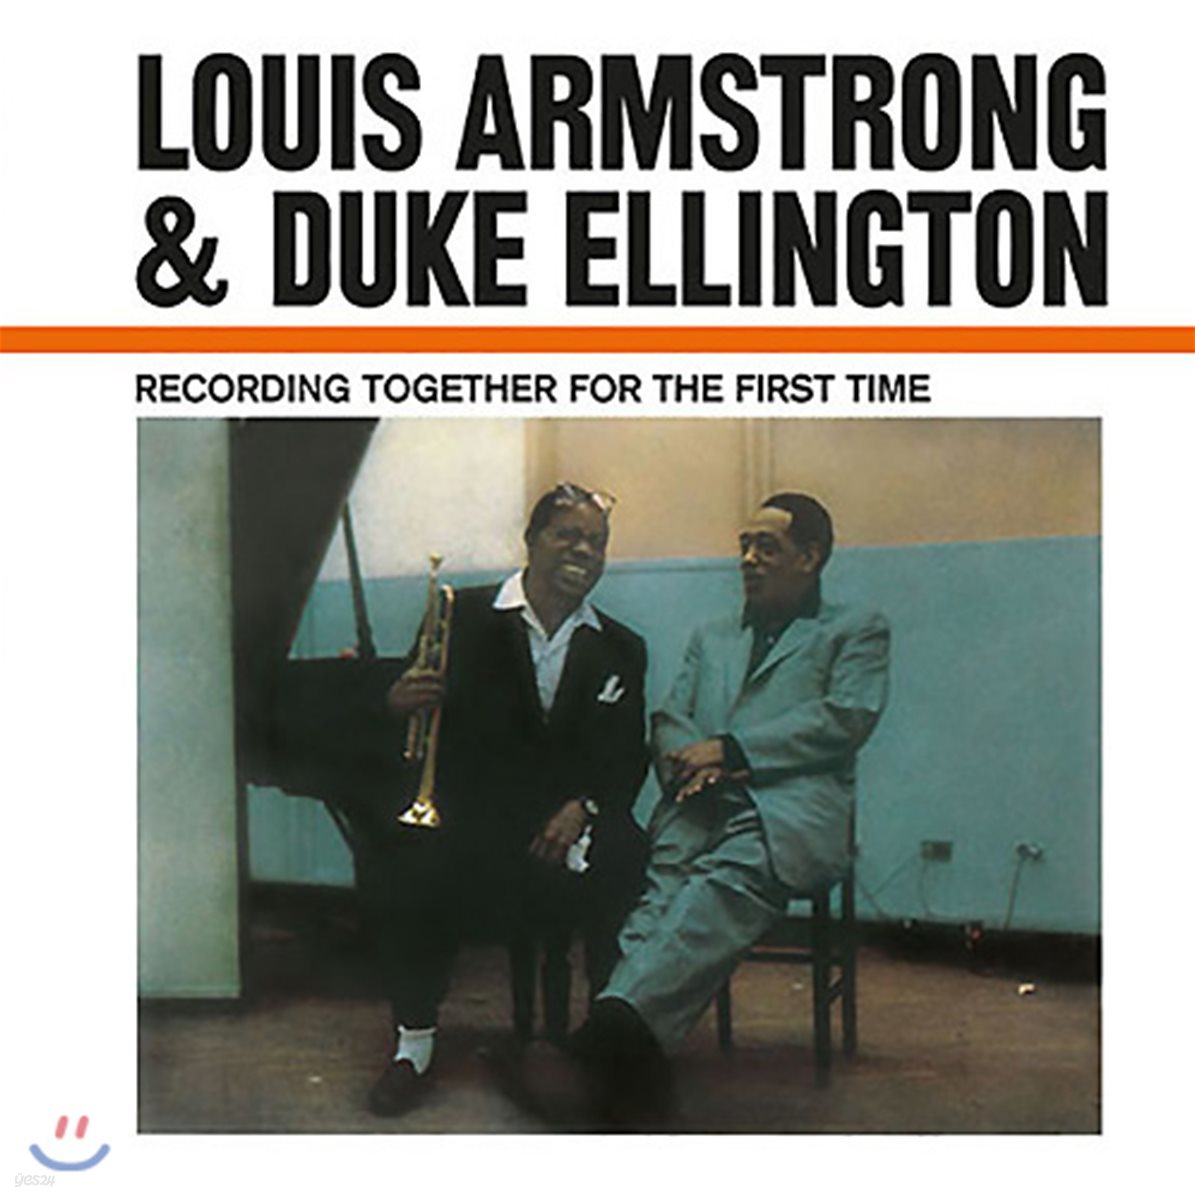 Louis Armstrong & Duke Ellington (루이 암스트롱, 듀크 엘링턴) - Recording Together For The First Time [LP]